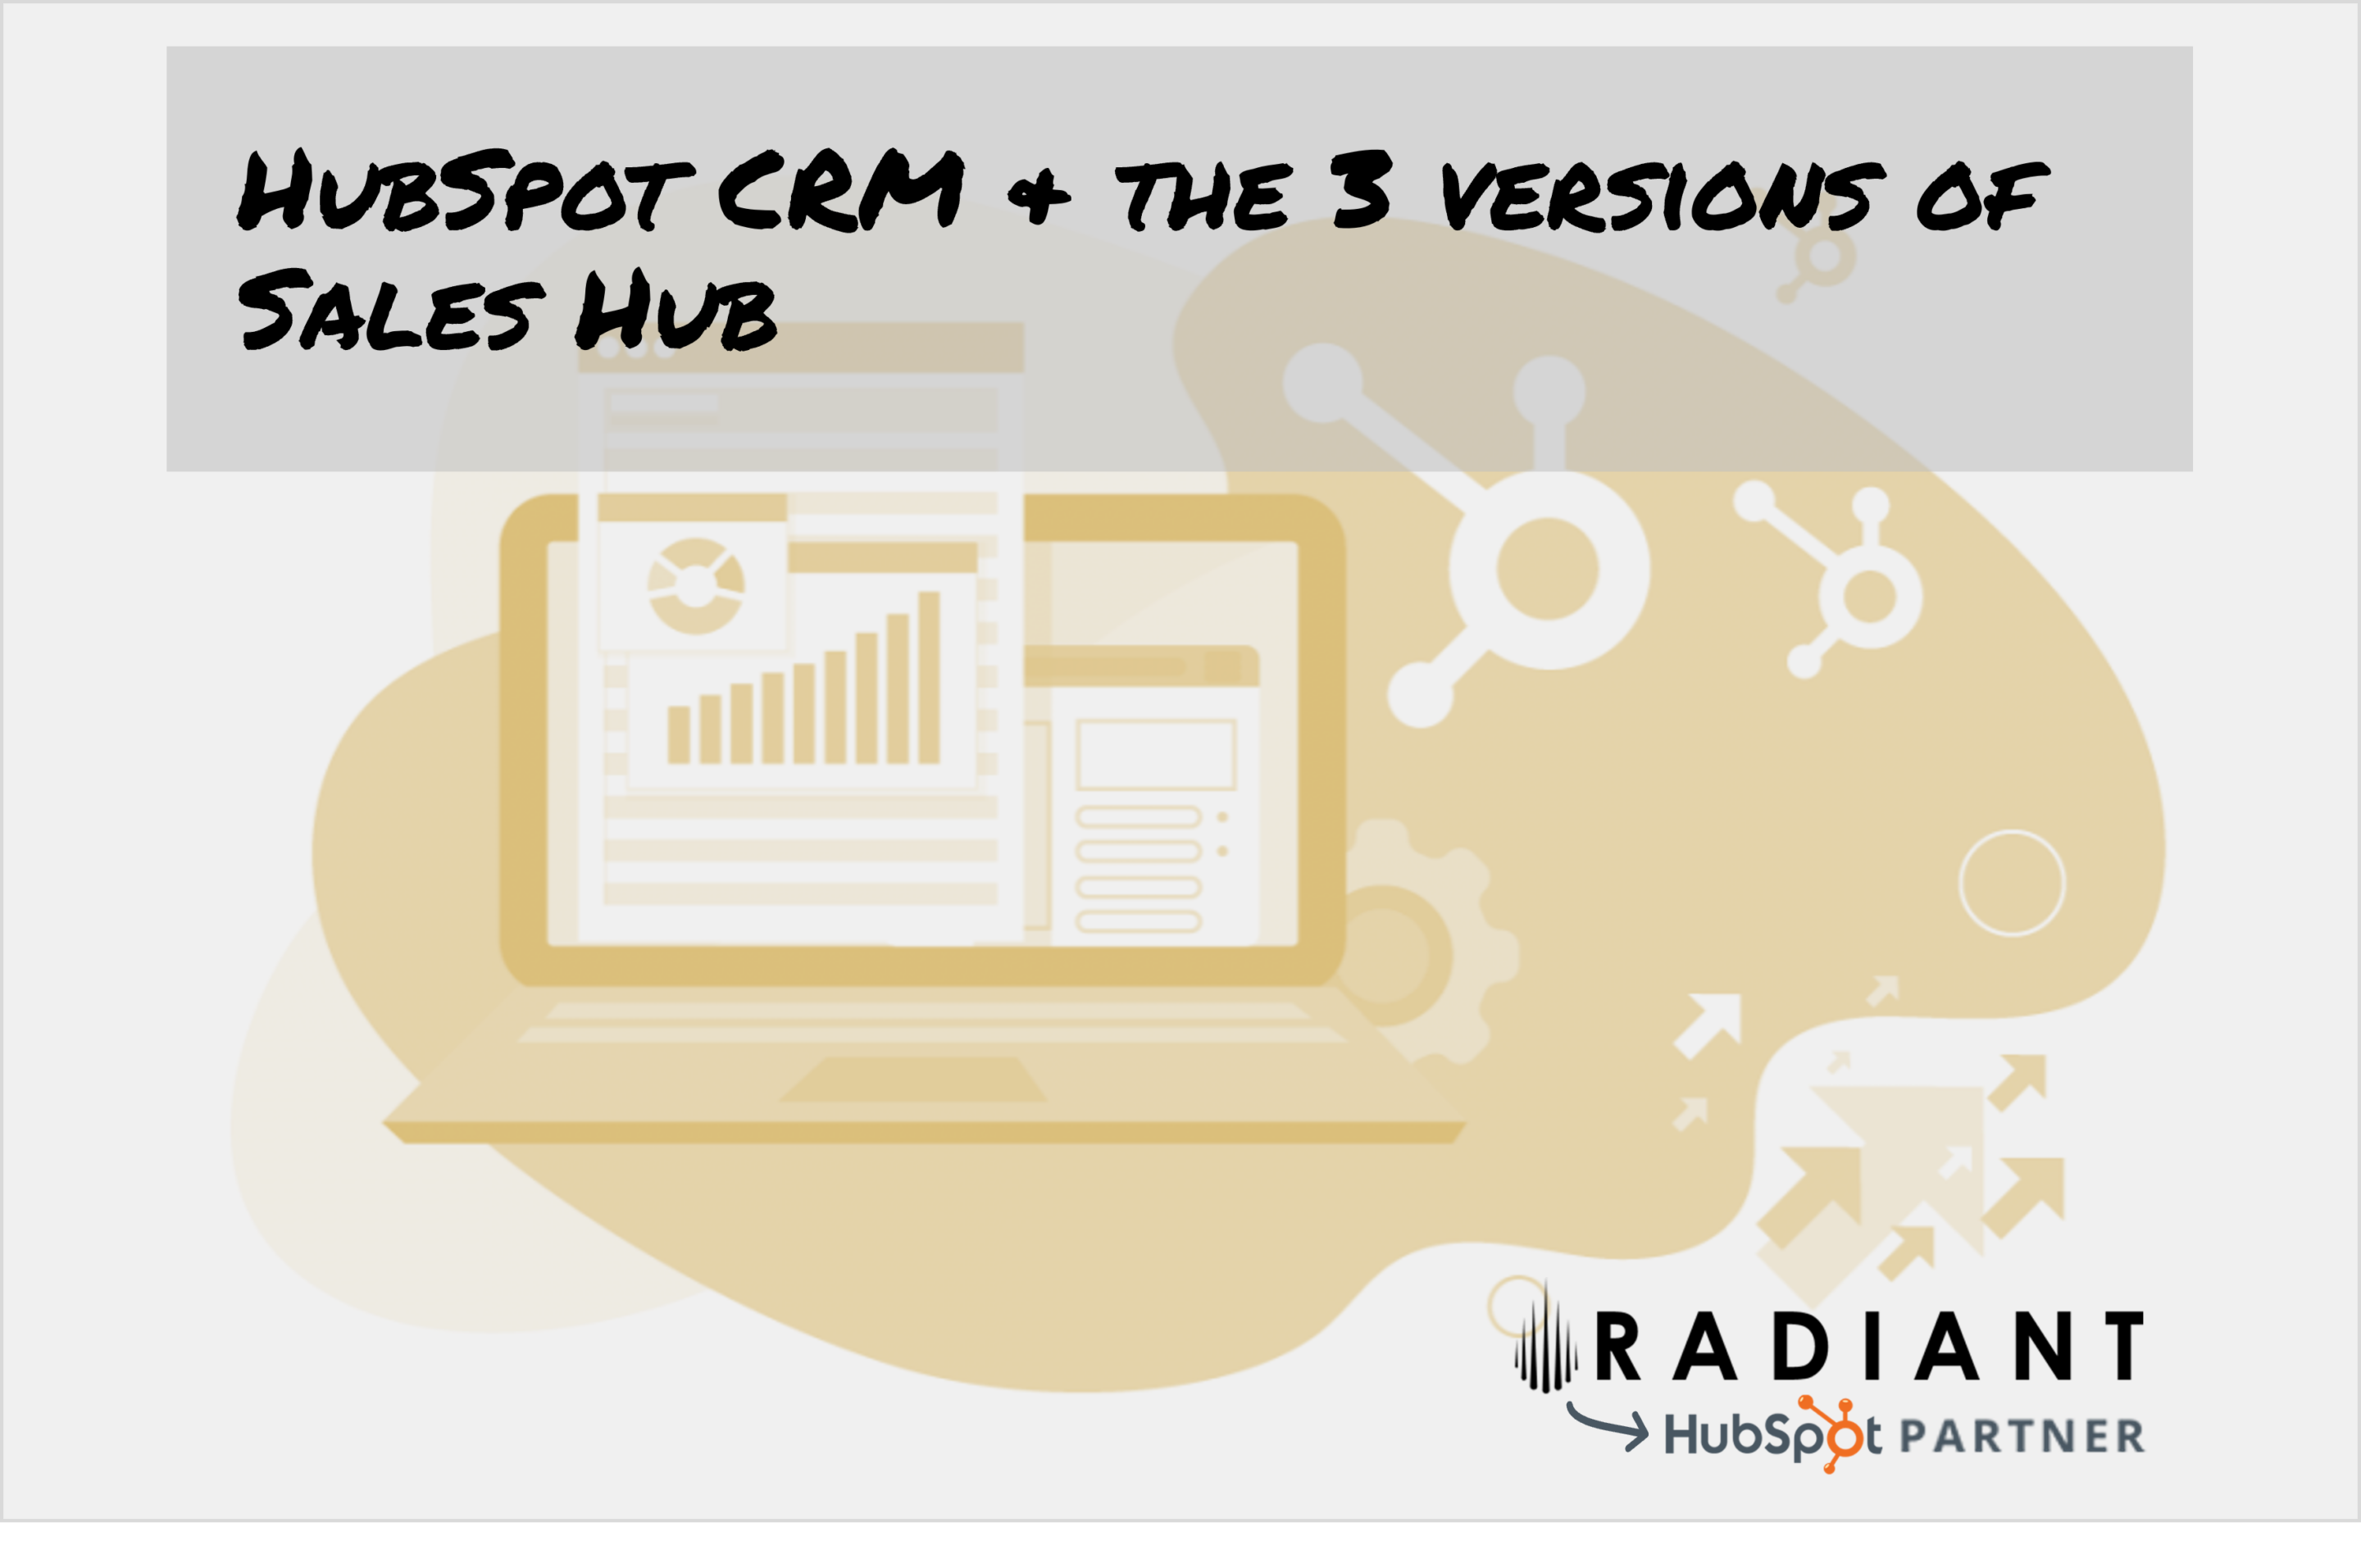 HubSpot CRM is popular - and for B2B sales, HubSpot is the preferred tool. Learn the 3 versions of Sales Hub from a certified HubSpot Partner.